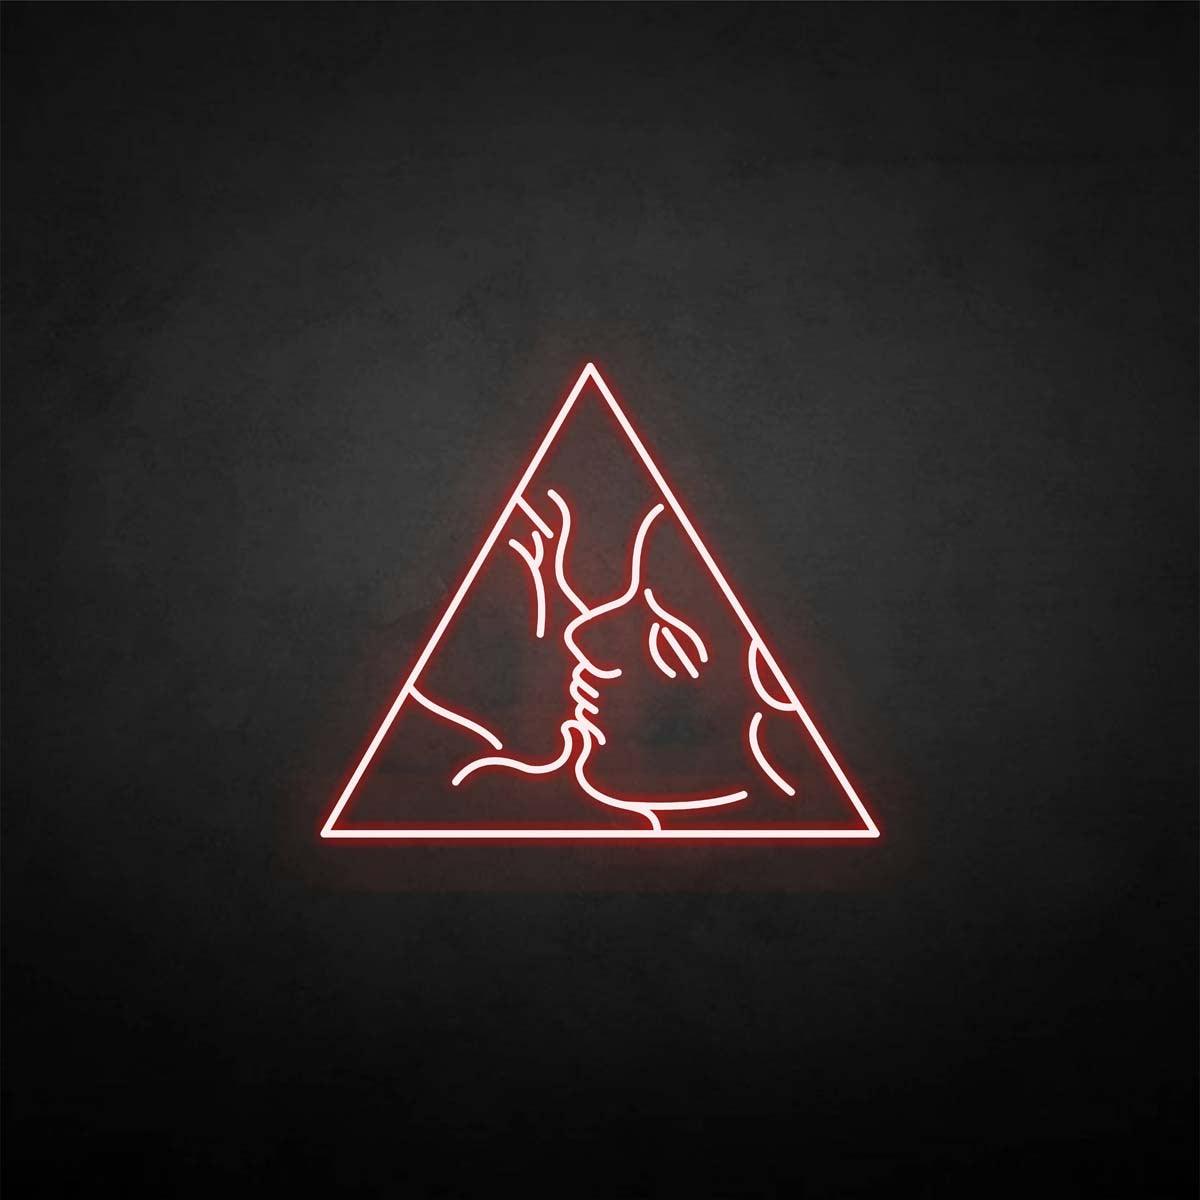 'FACE IN TRIANGLE' neon sign